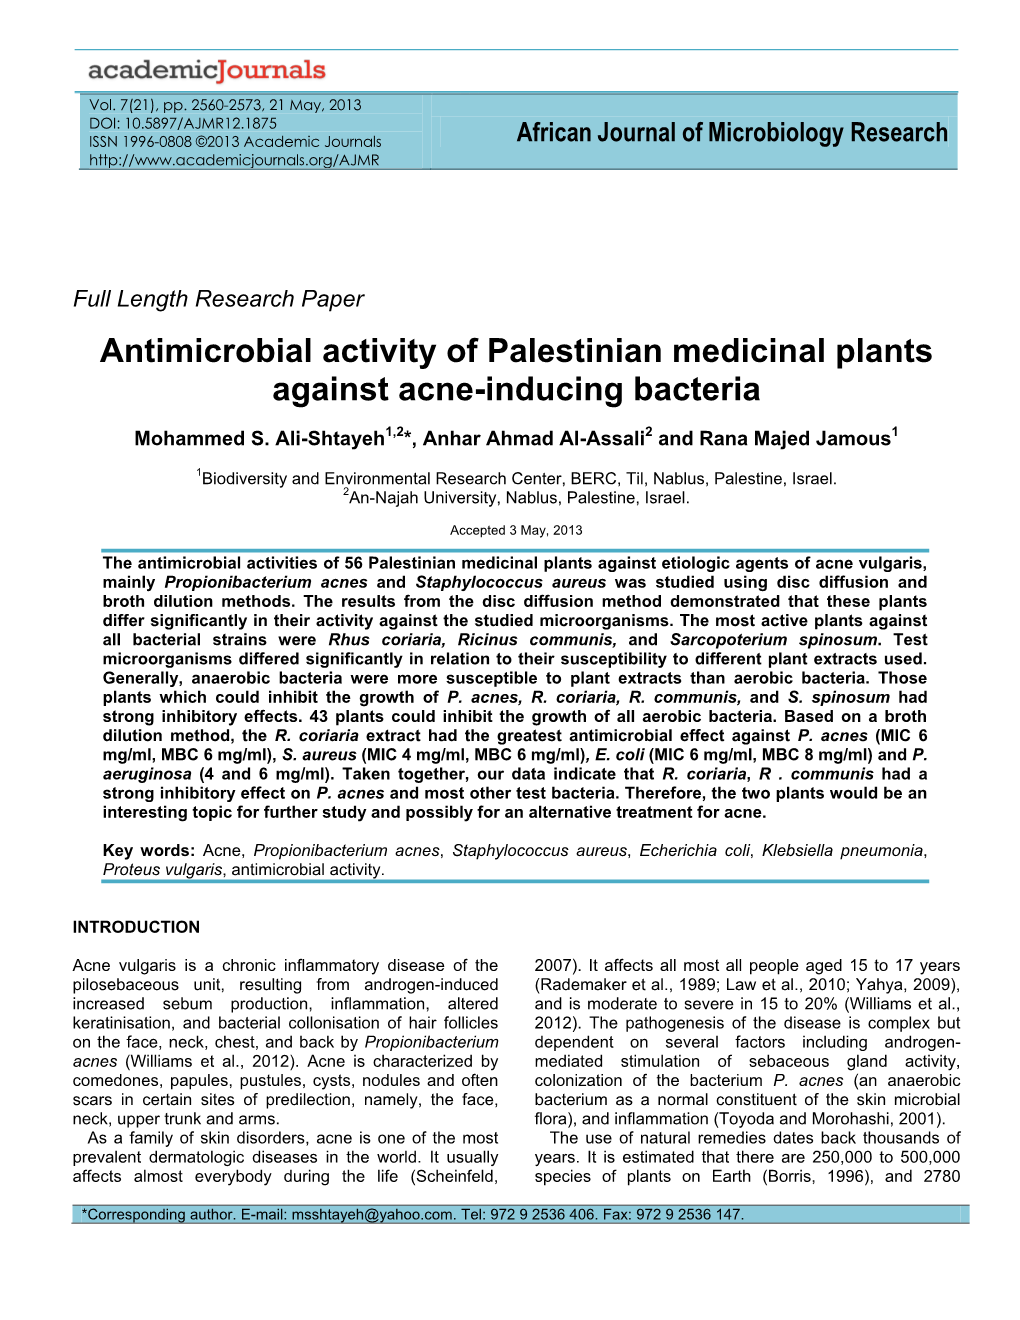 Antimicrobial Activity of Palestinian Medicinal Plants Against Acne-Inducing Bacteria